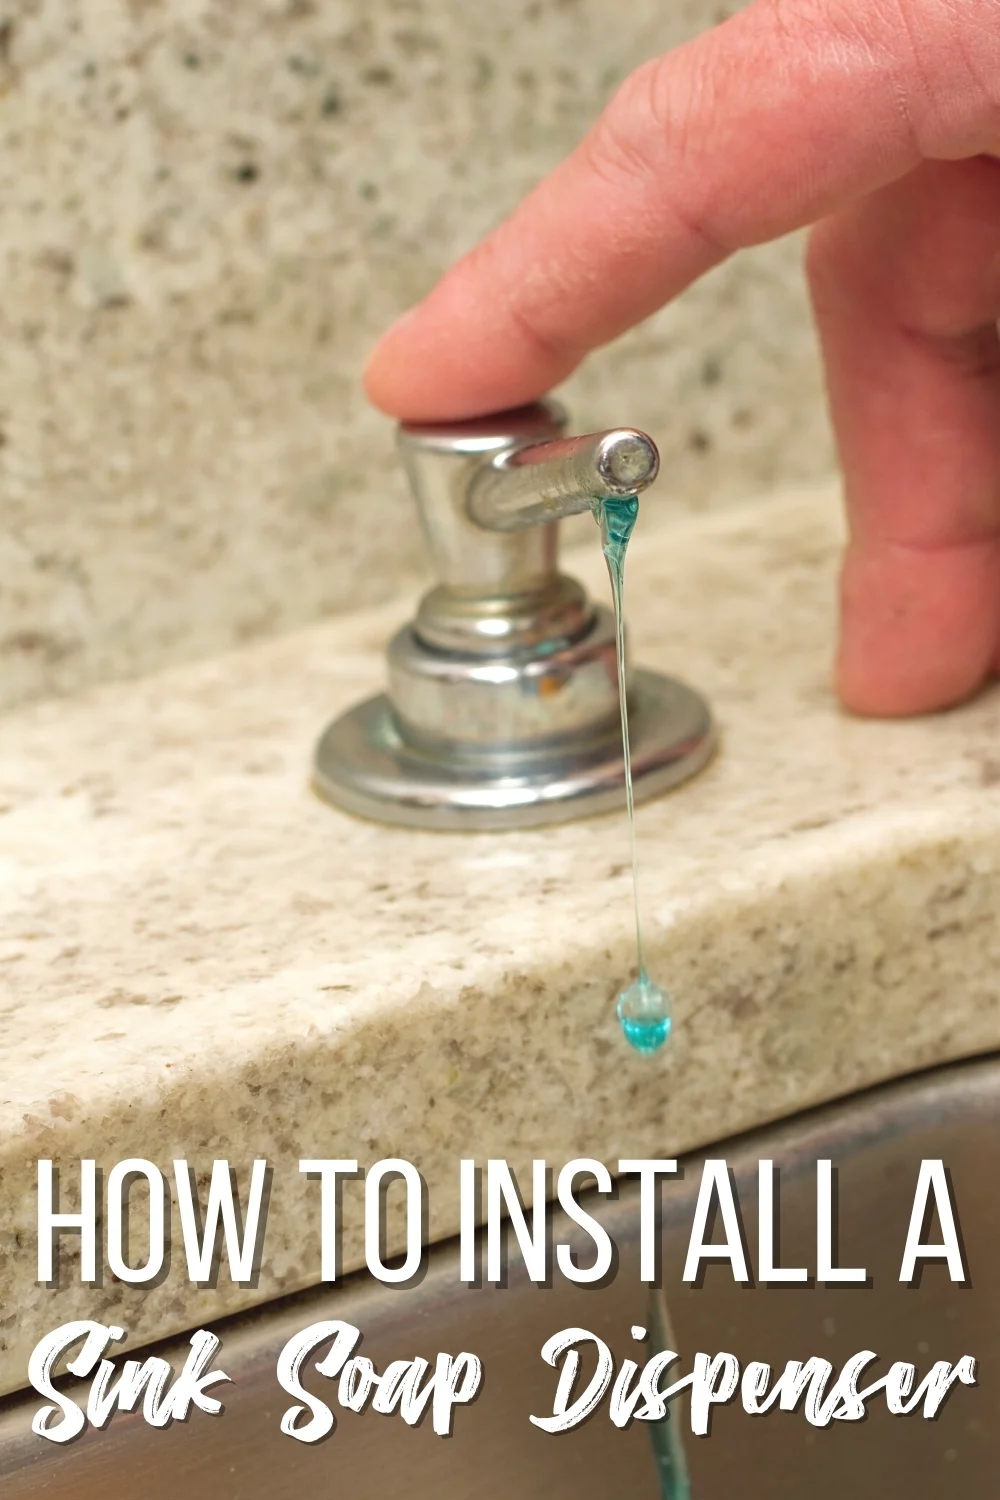 https://www.thehandymansdaughter.com/wp-content/uploads/2021/06/How-to-Install-a-Sink-Soap-Dispenser-Pin-2.jpg.webp